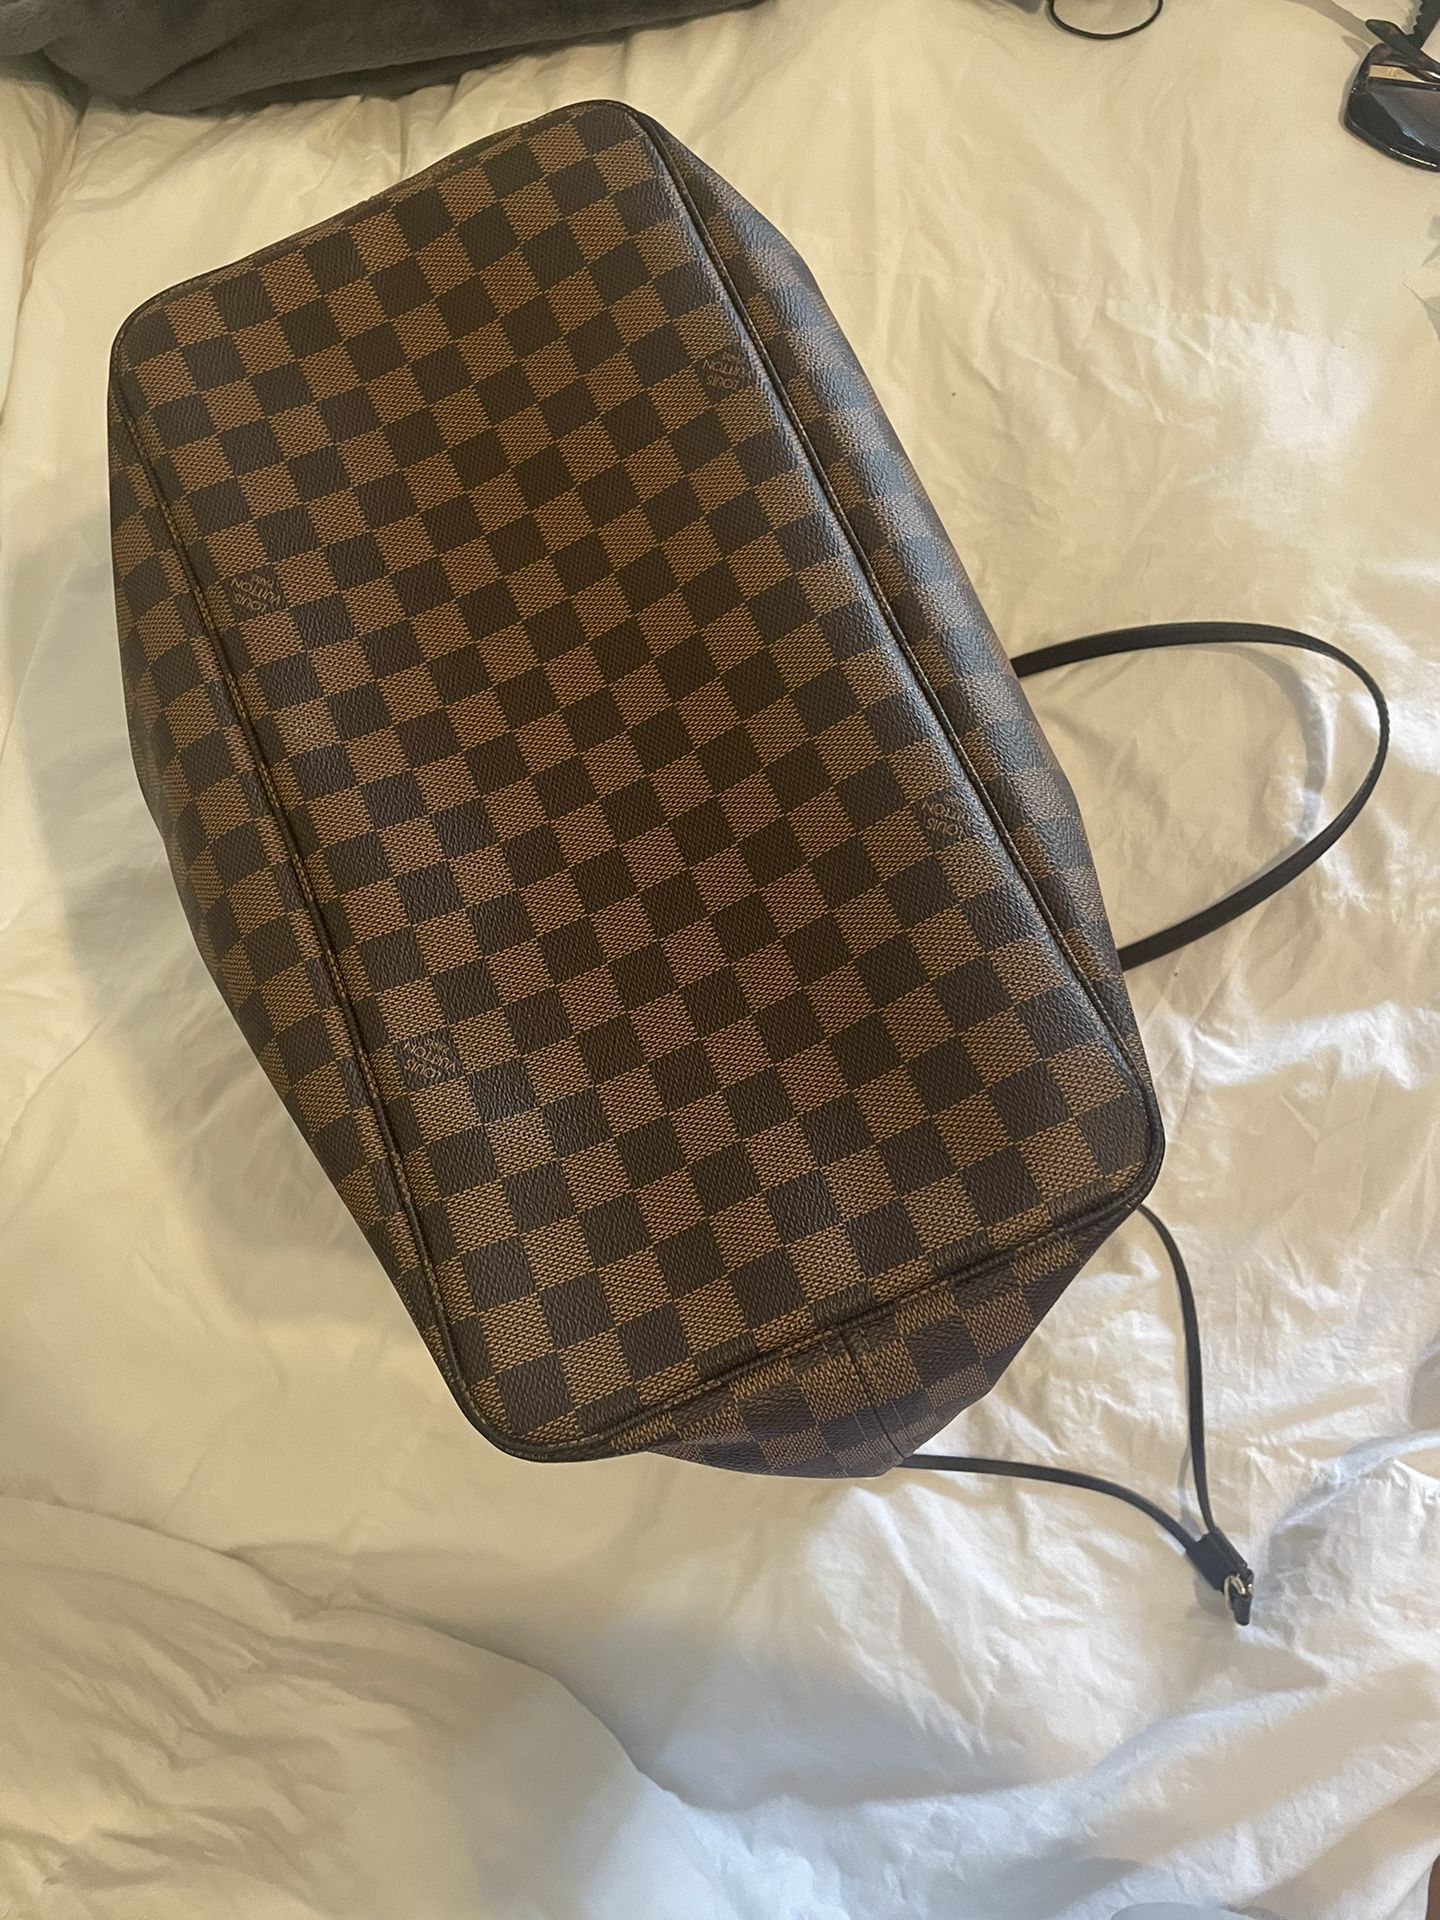 Louis Vuitton Neverfull Damier for Sale in Dallas, TX - OfferUp